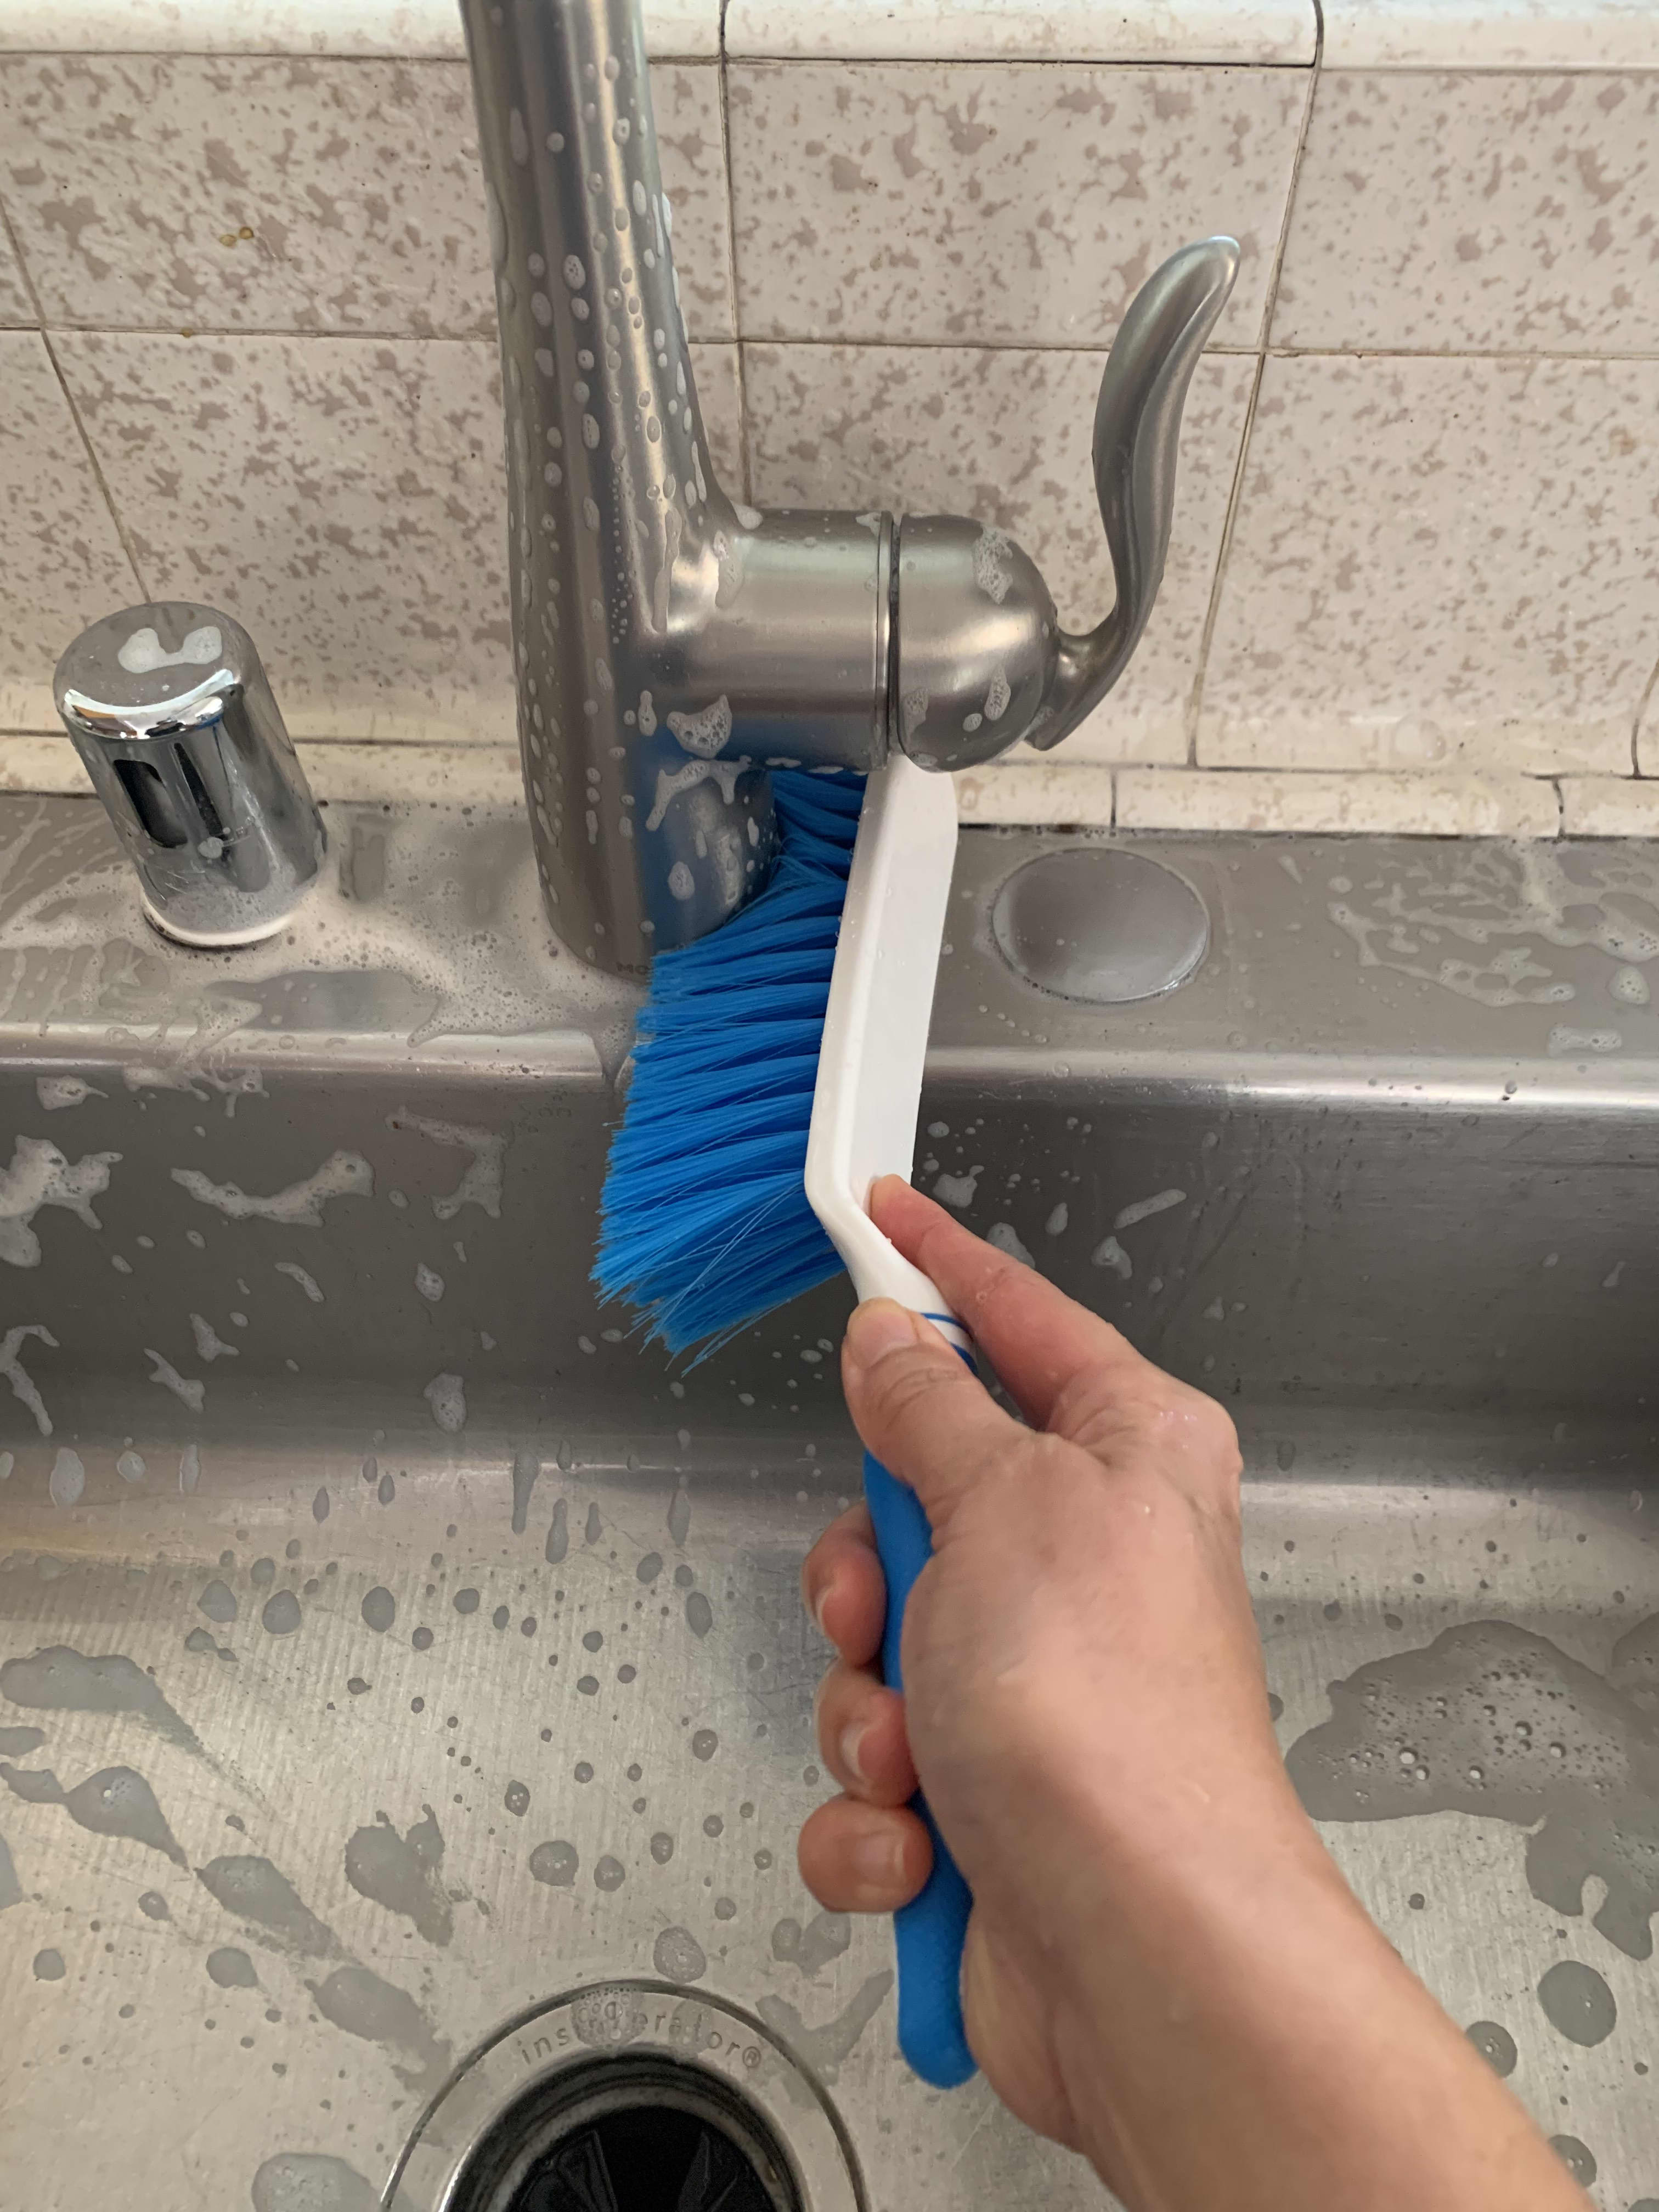 https://cdn.apartmenttherapy.info/image/upload/v1666801798/k/Edit/2022-10-Dust-Brushes-Sink-Cleaning/scrubbing_faucet_with_brush.jpg